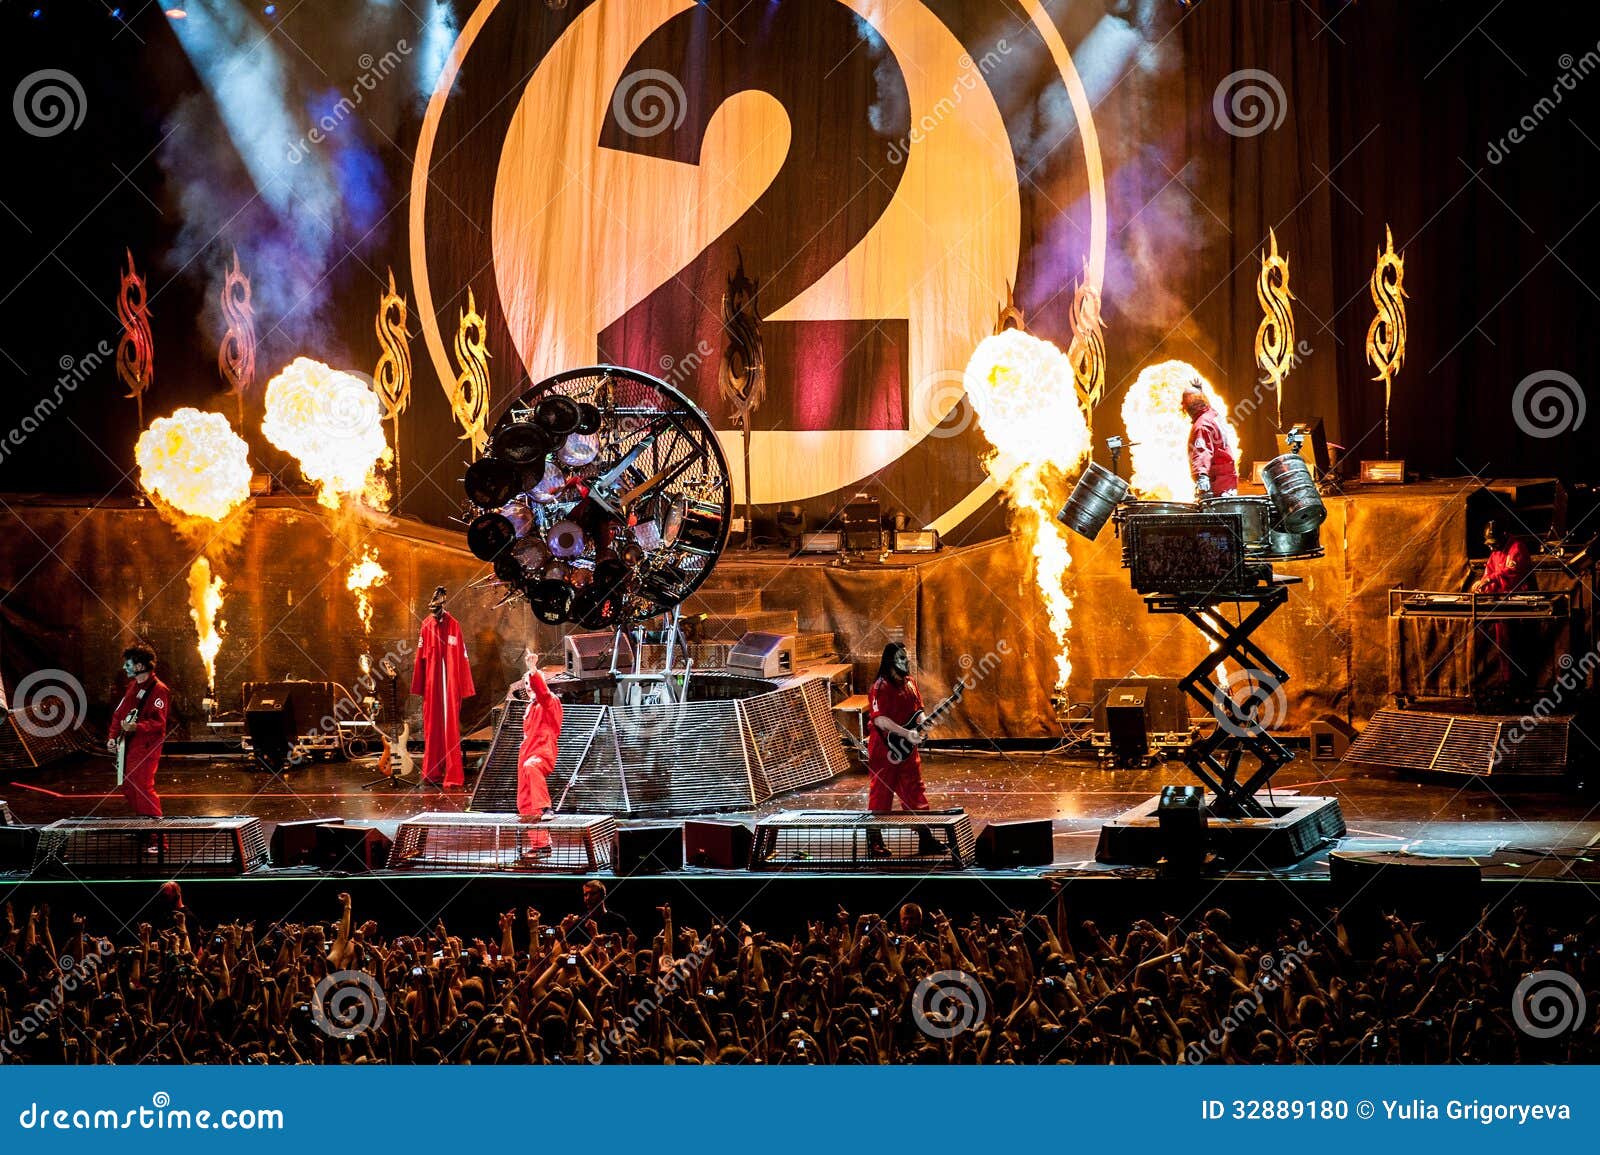 295 Slipknot Photos Free Royalty Free Stock Photos From Dreamstime